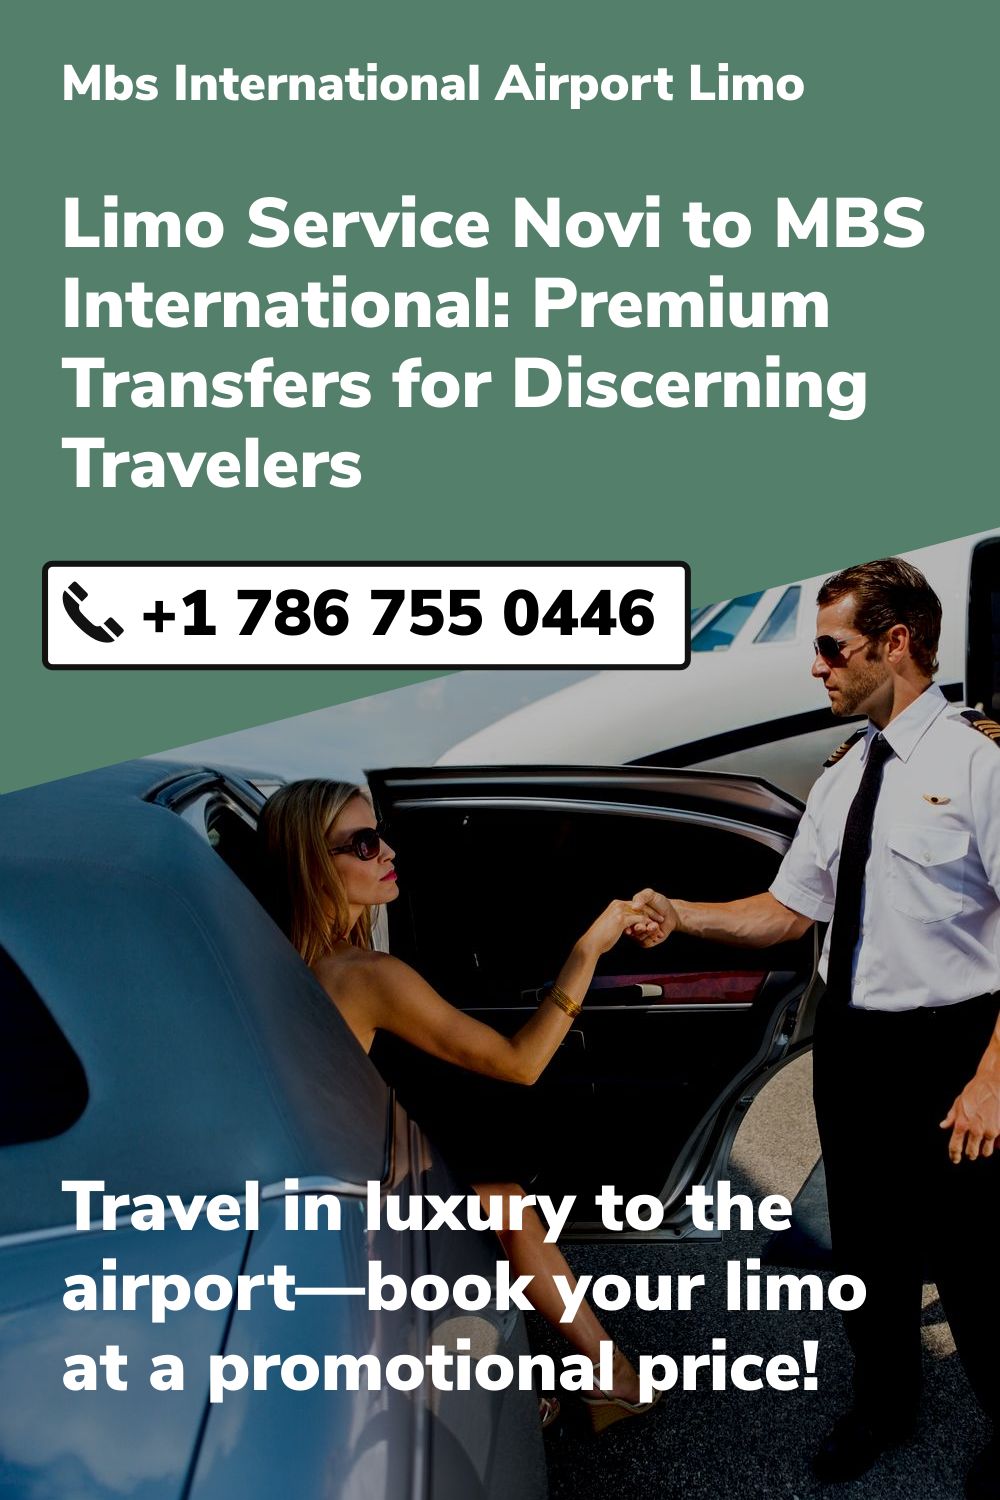 Mbs International Airport Limo